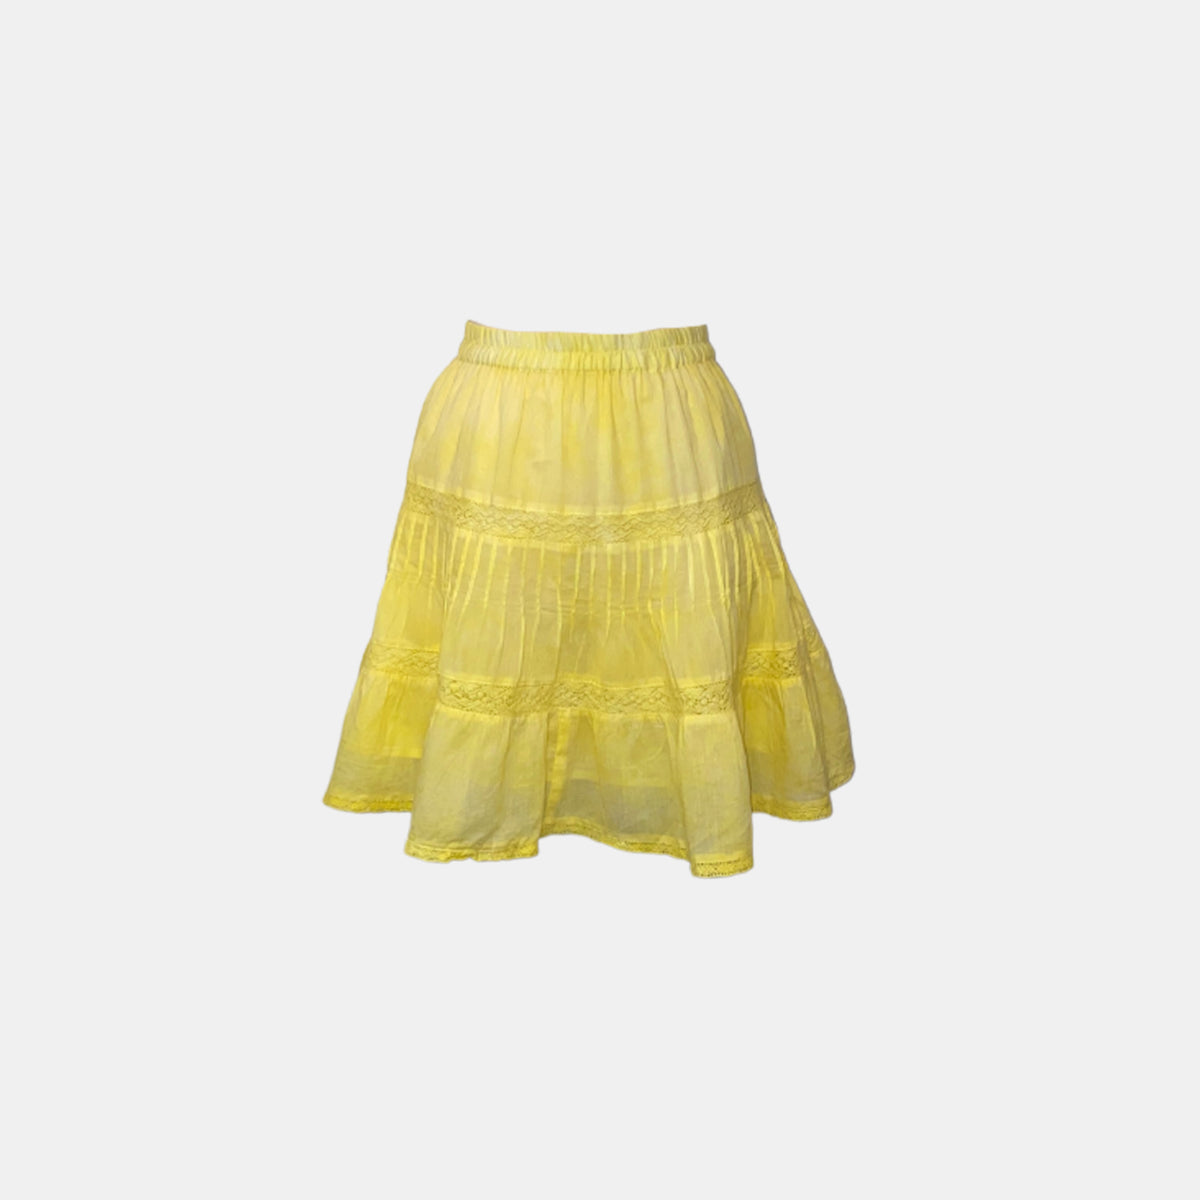 Allison New York Emmie High Waisted Mini Skirt in Yellow